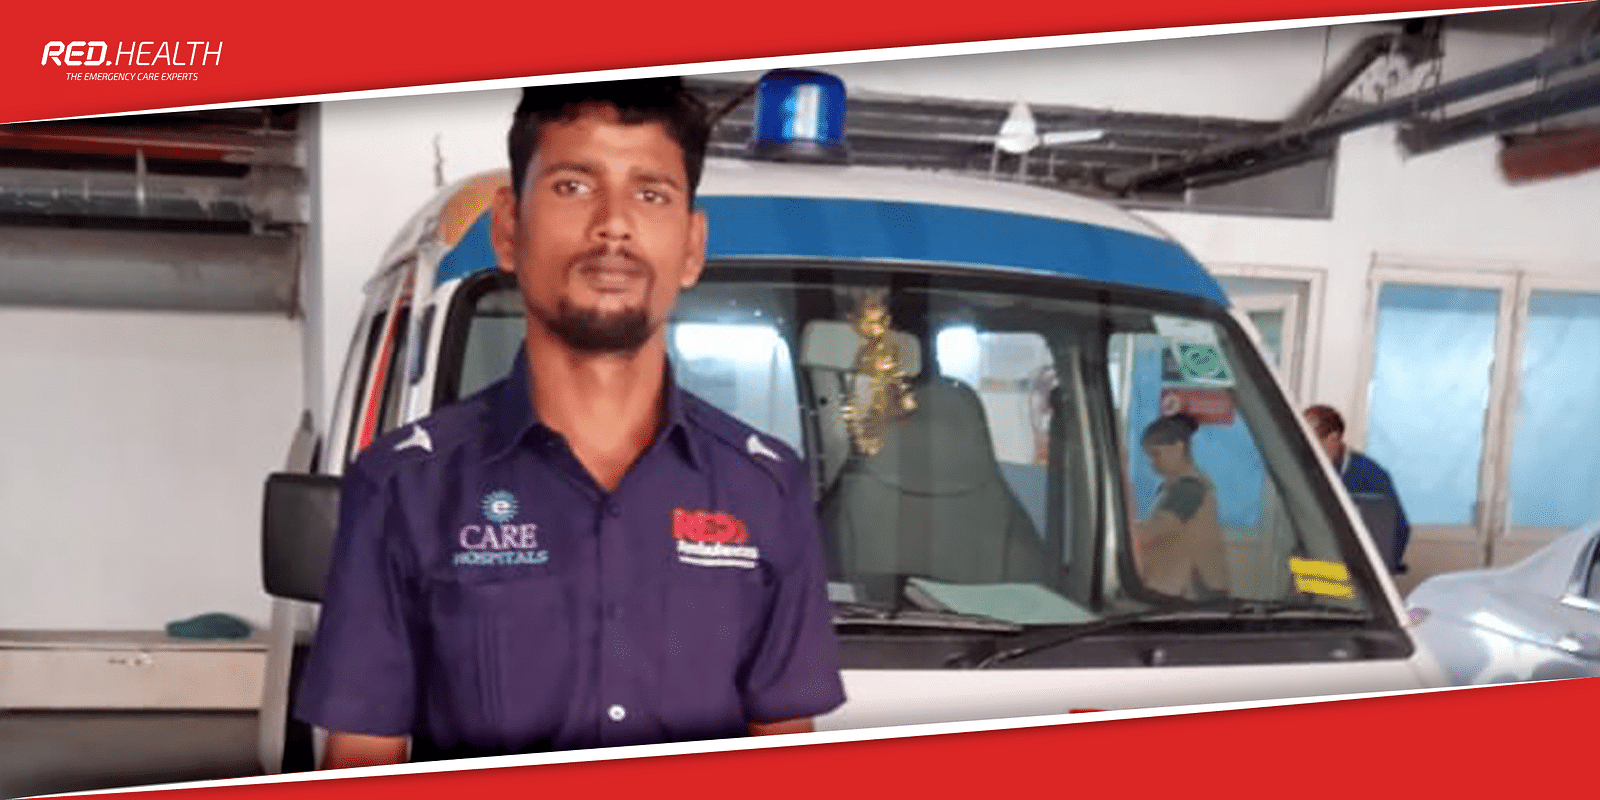 A Day with Nawaz: Life as an Ambulance Pilot at RED.Health